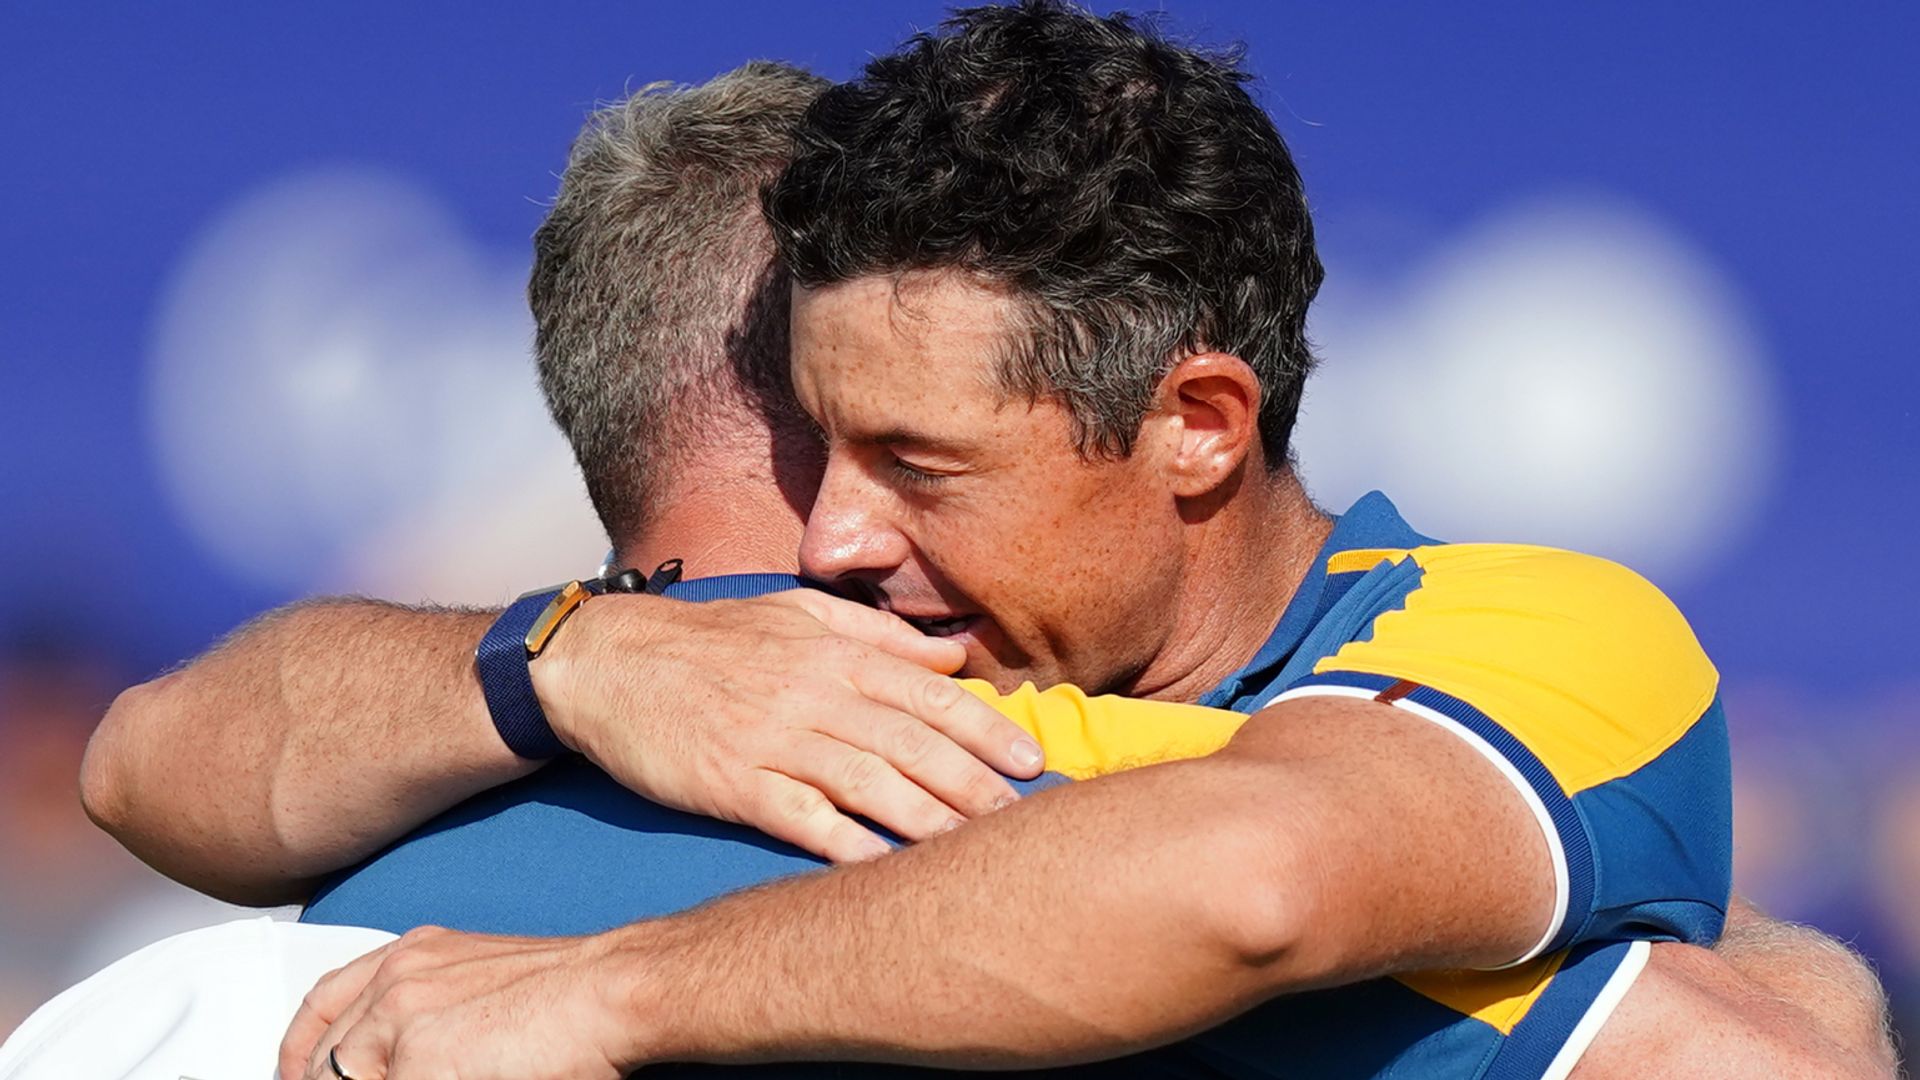 McIlroy's Ryder Cup message to Team USA: We'll beat you in America!